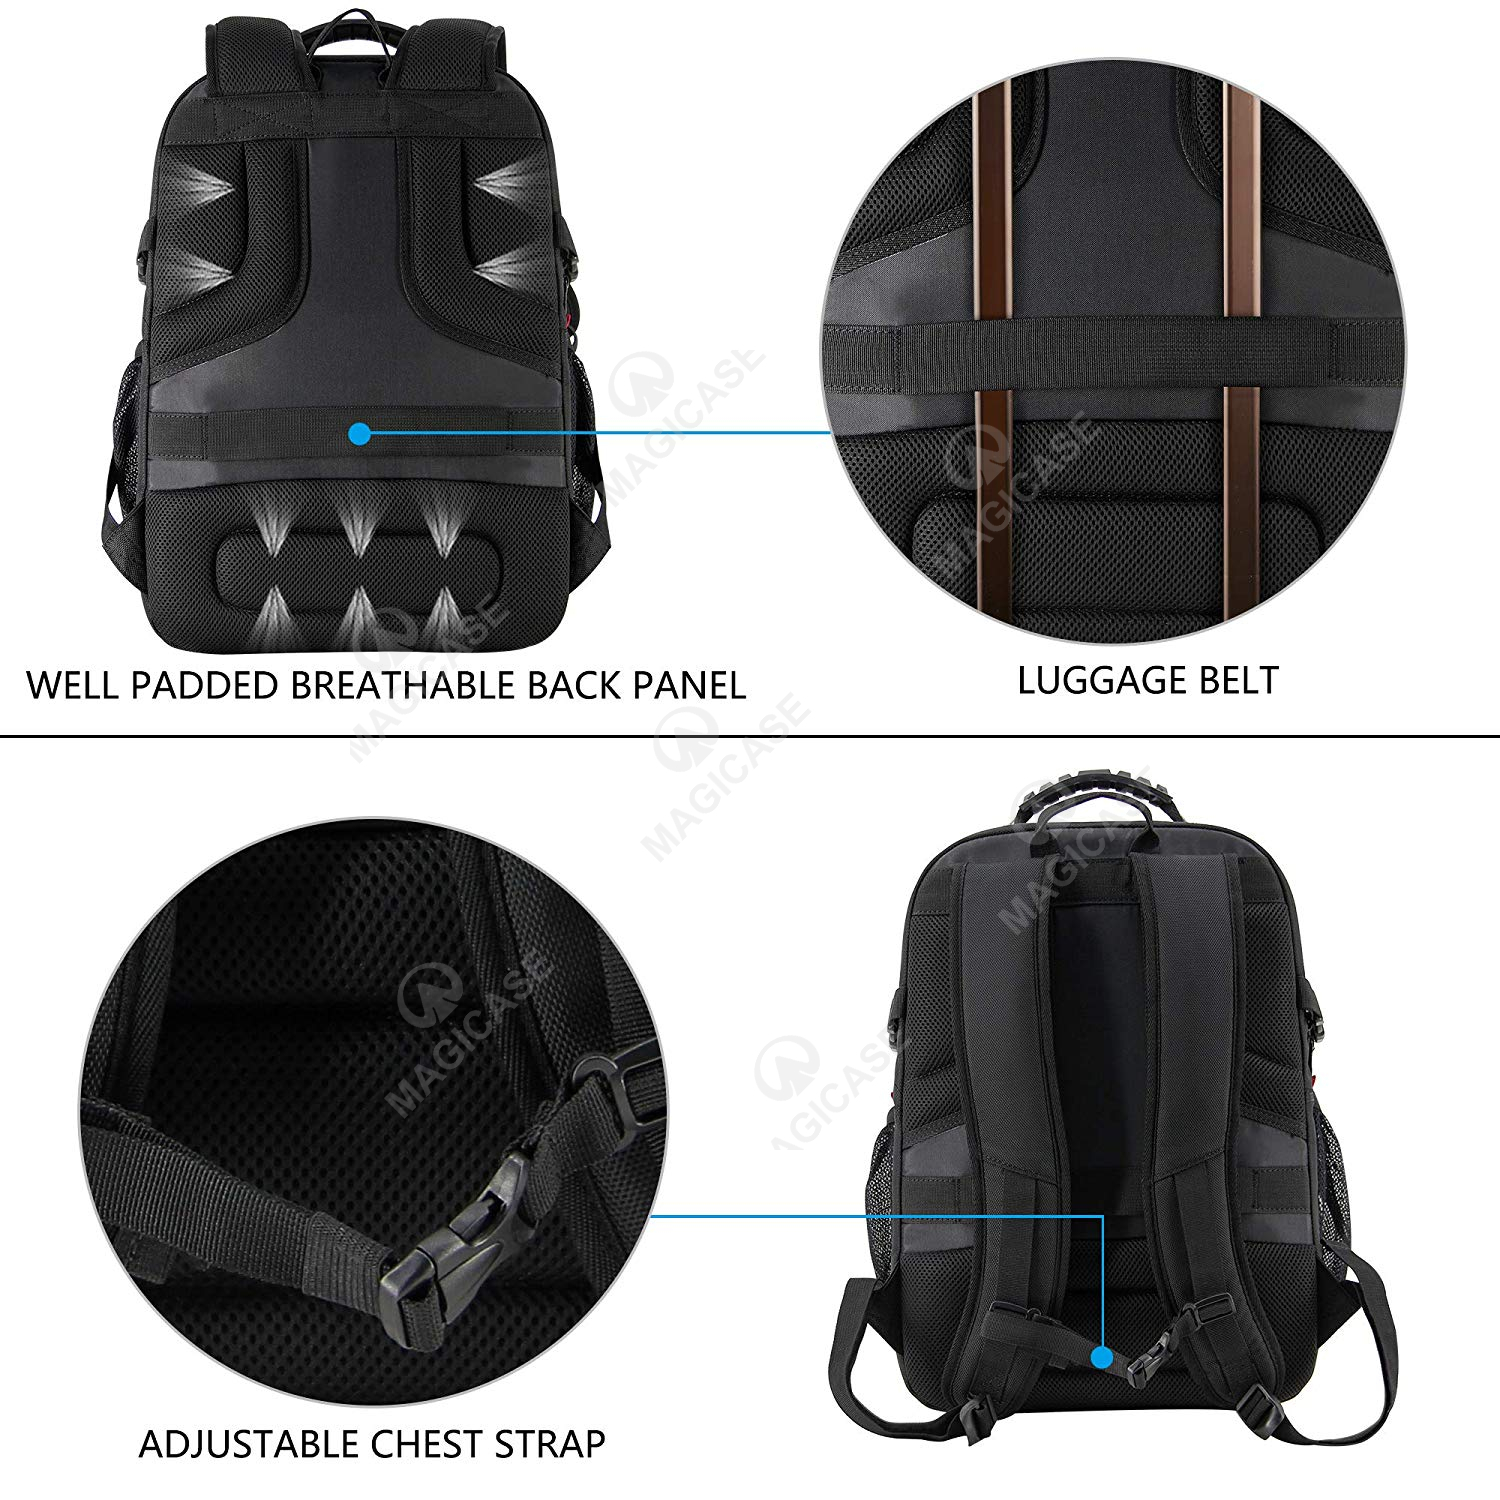 MAGICASE Travel Laptop Backpack 17 Inch Large Computer Backpack